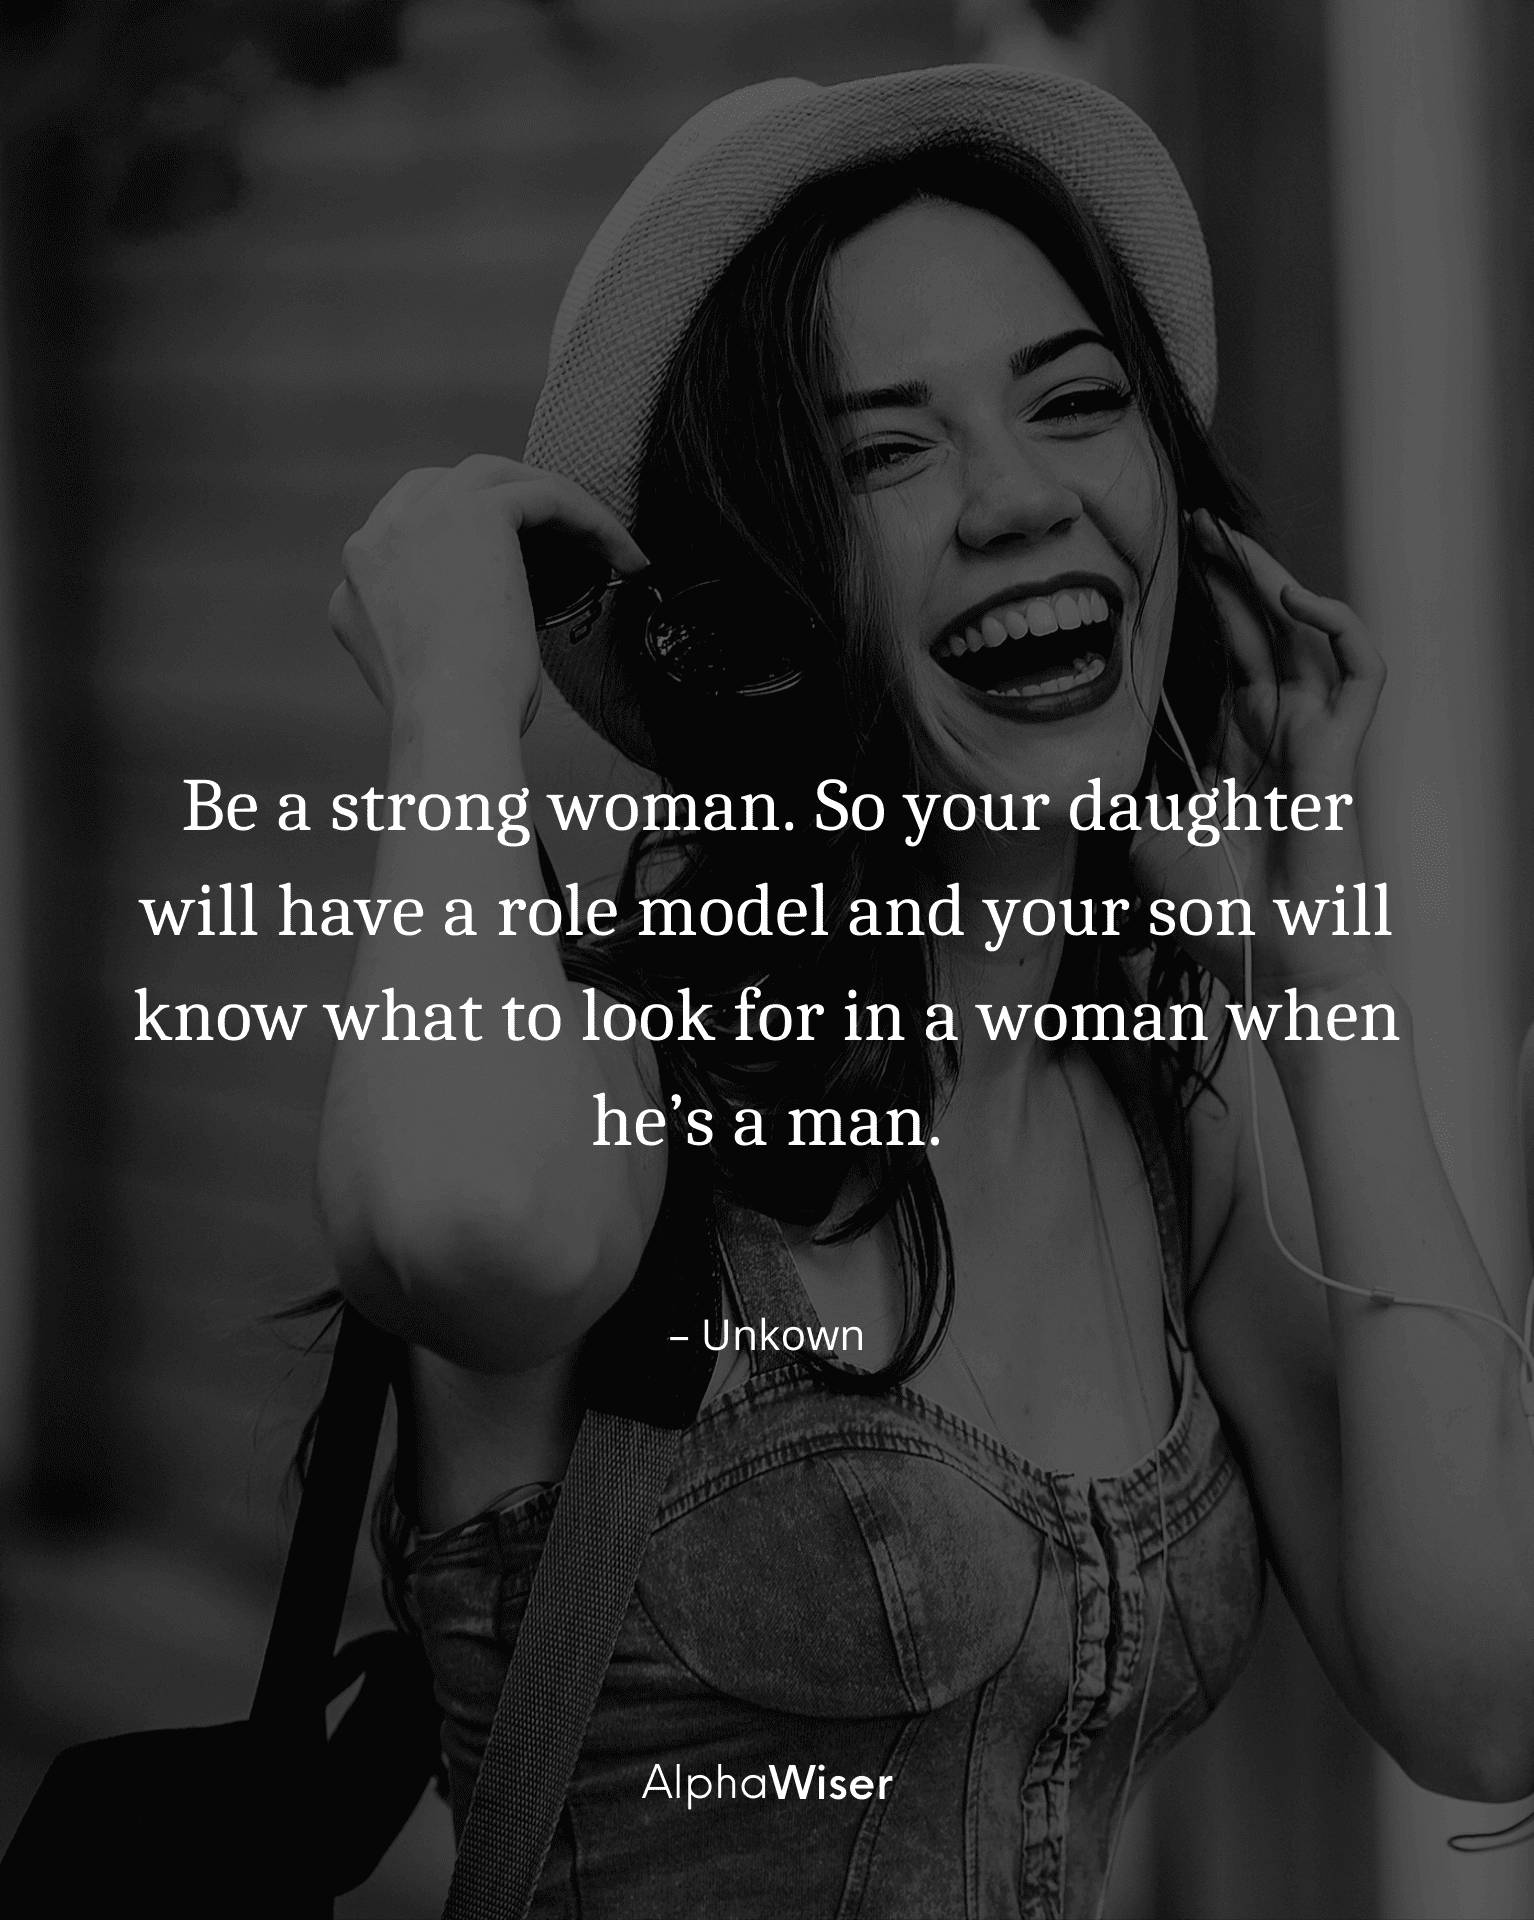 Be a strong woman. So your daughter will have a role model